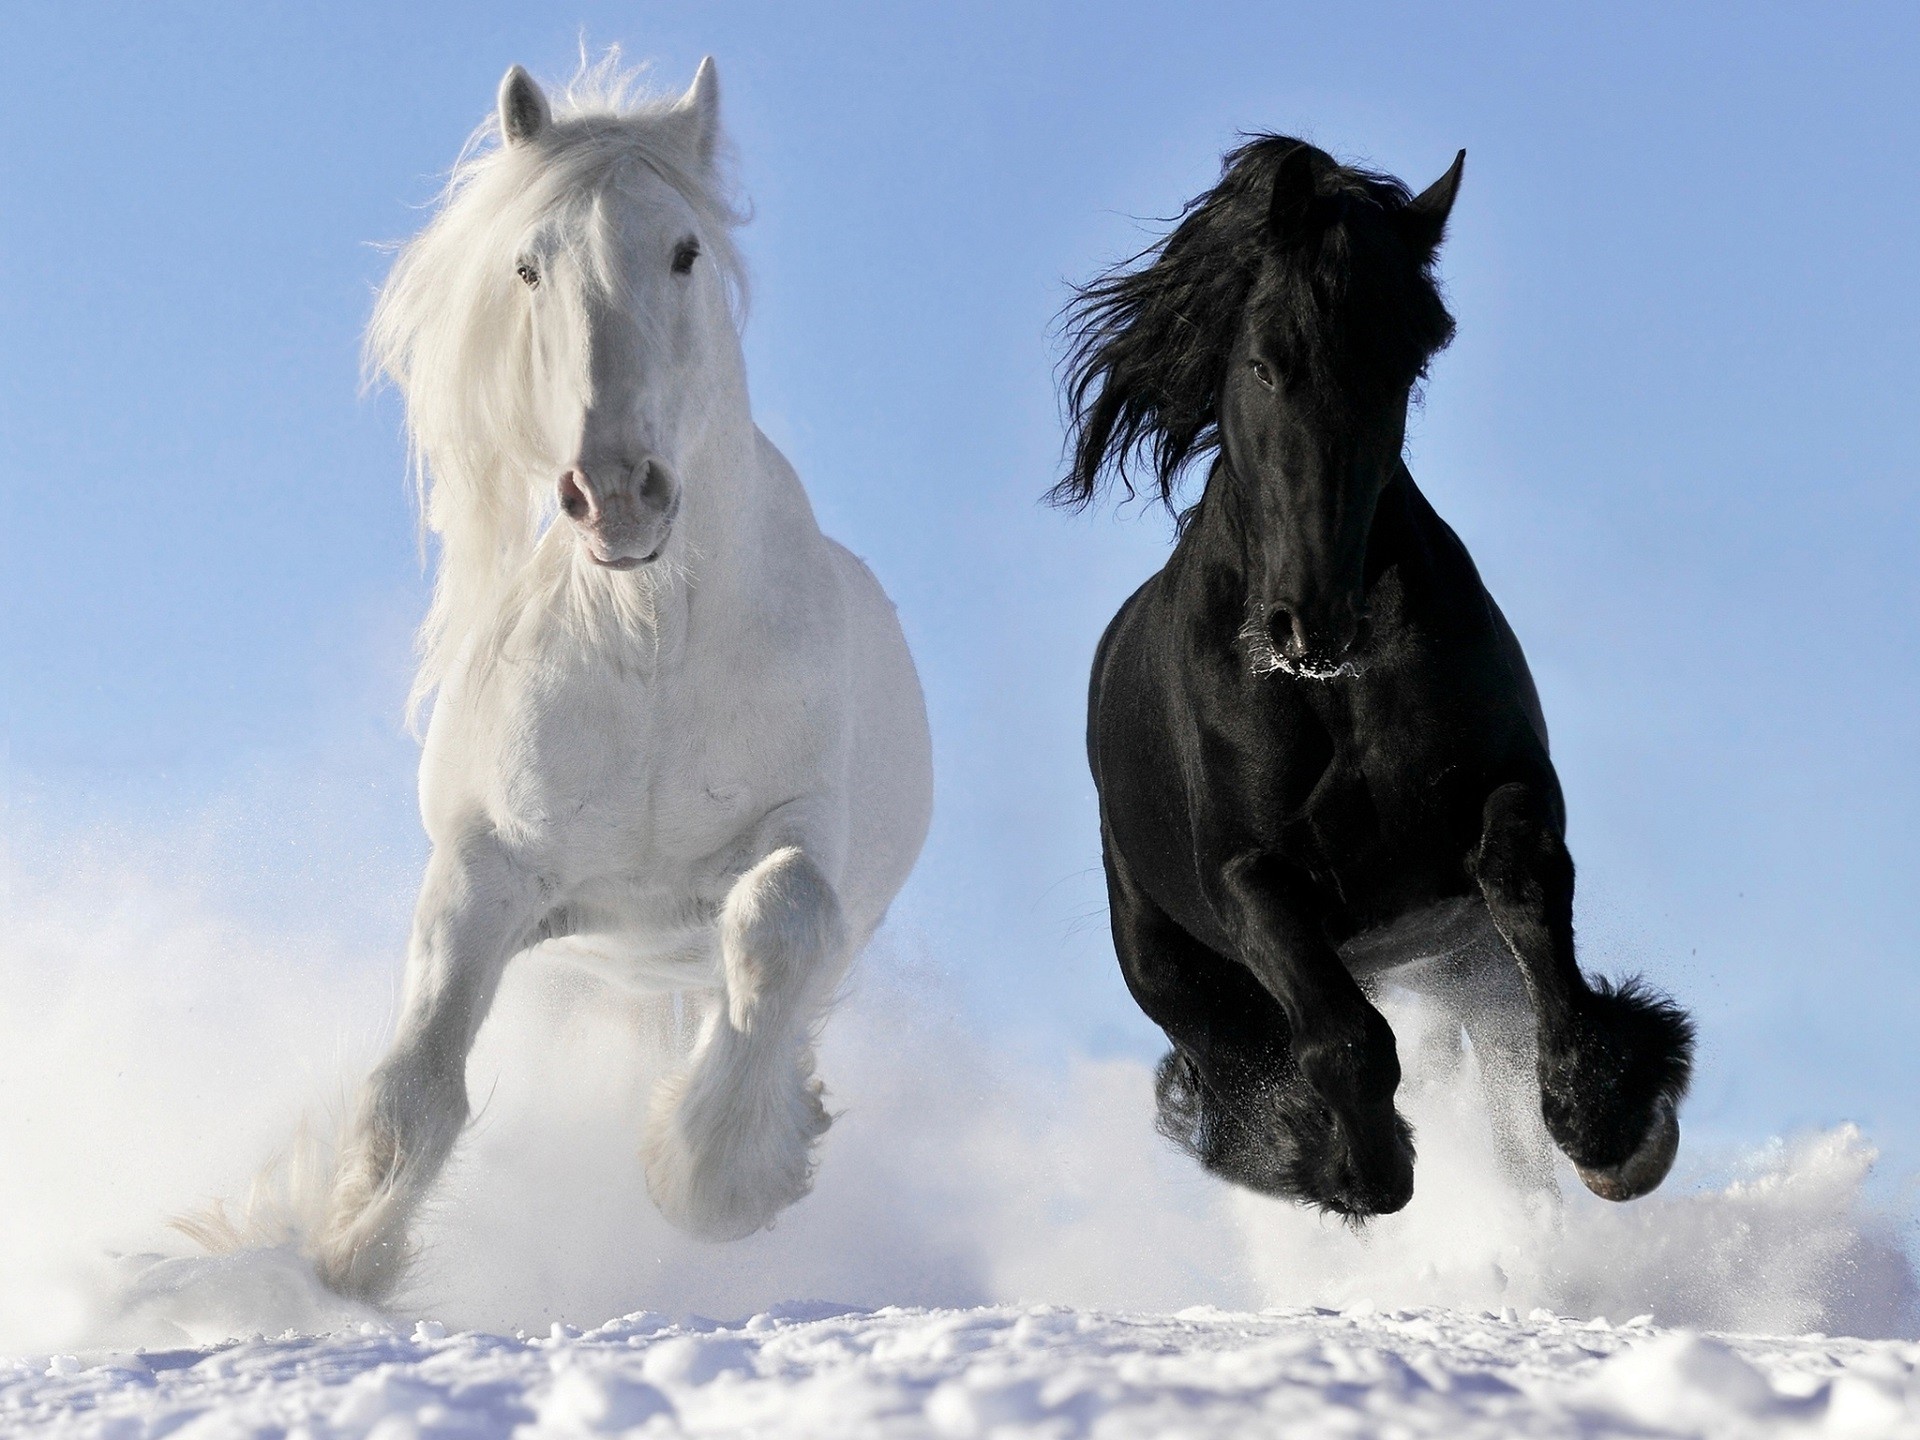 General 1920x1440 nature horse snow black clear sky white blue frontal view mammals winter cold outdoors animals